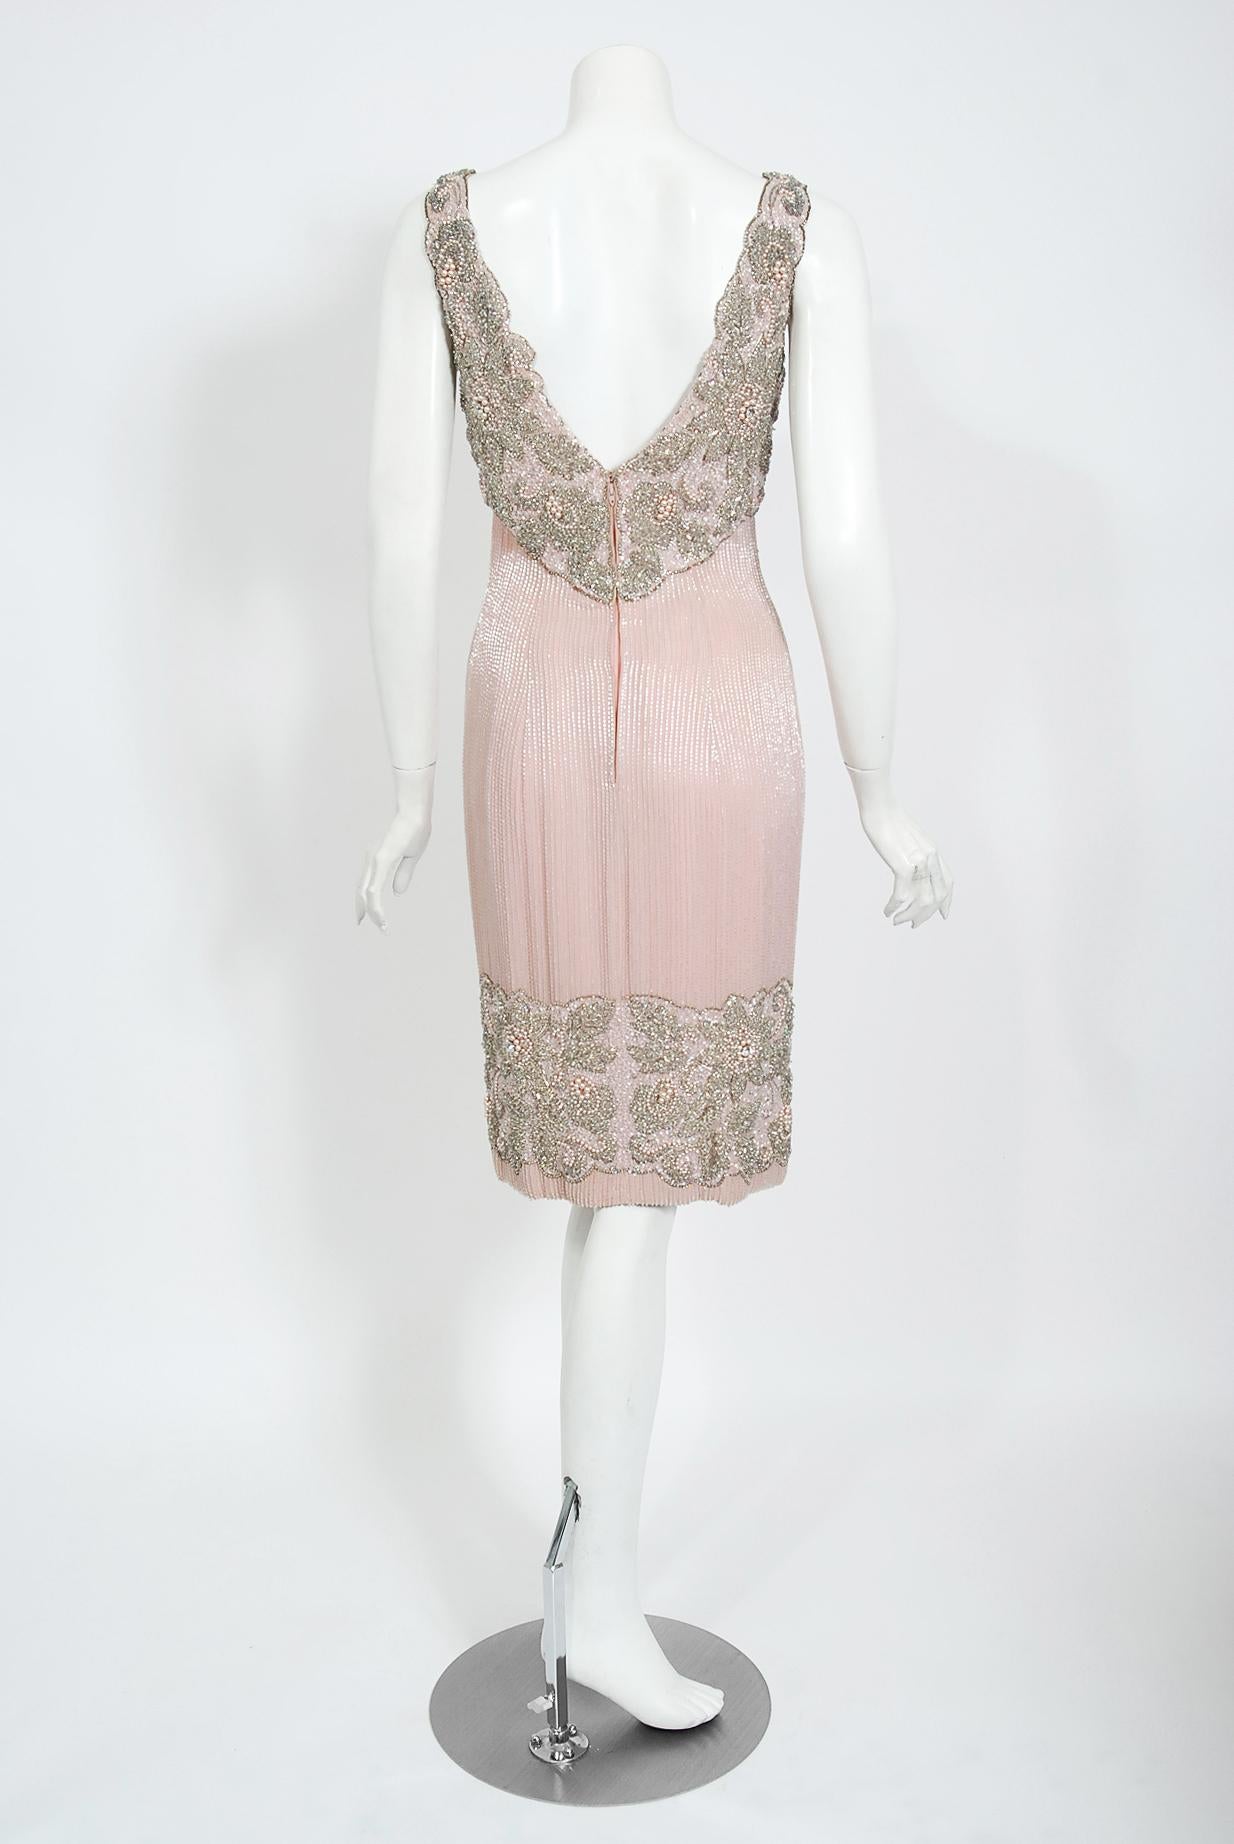 Vintage 1960's Helen Rose Couture Fully-Beaded Blush Pink Silk Hourglass Dress For Sale 2